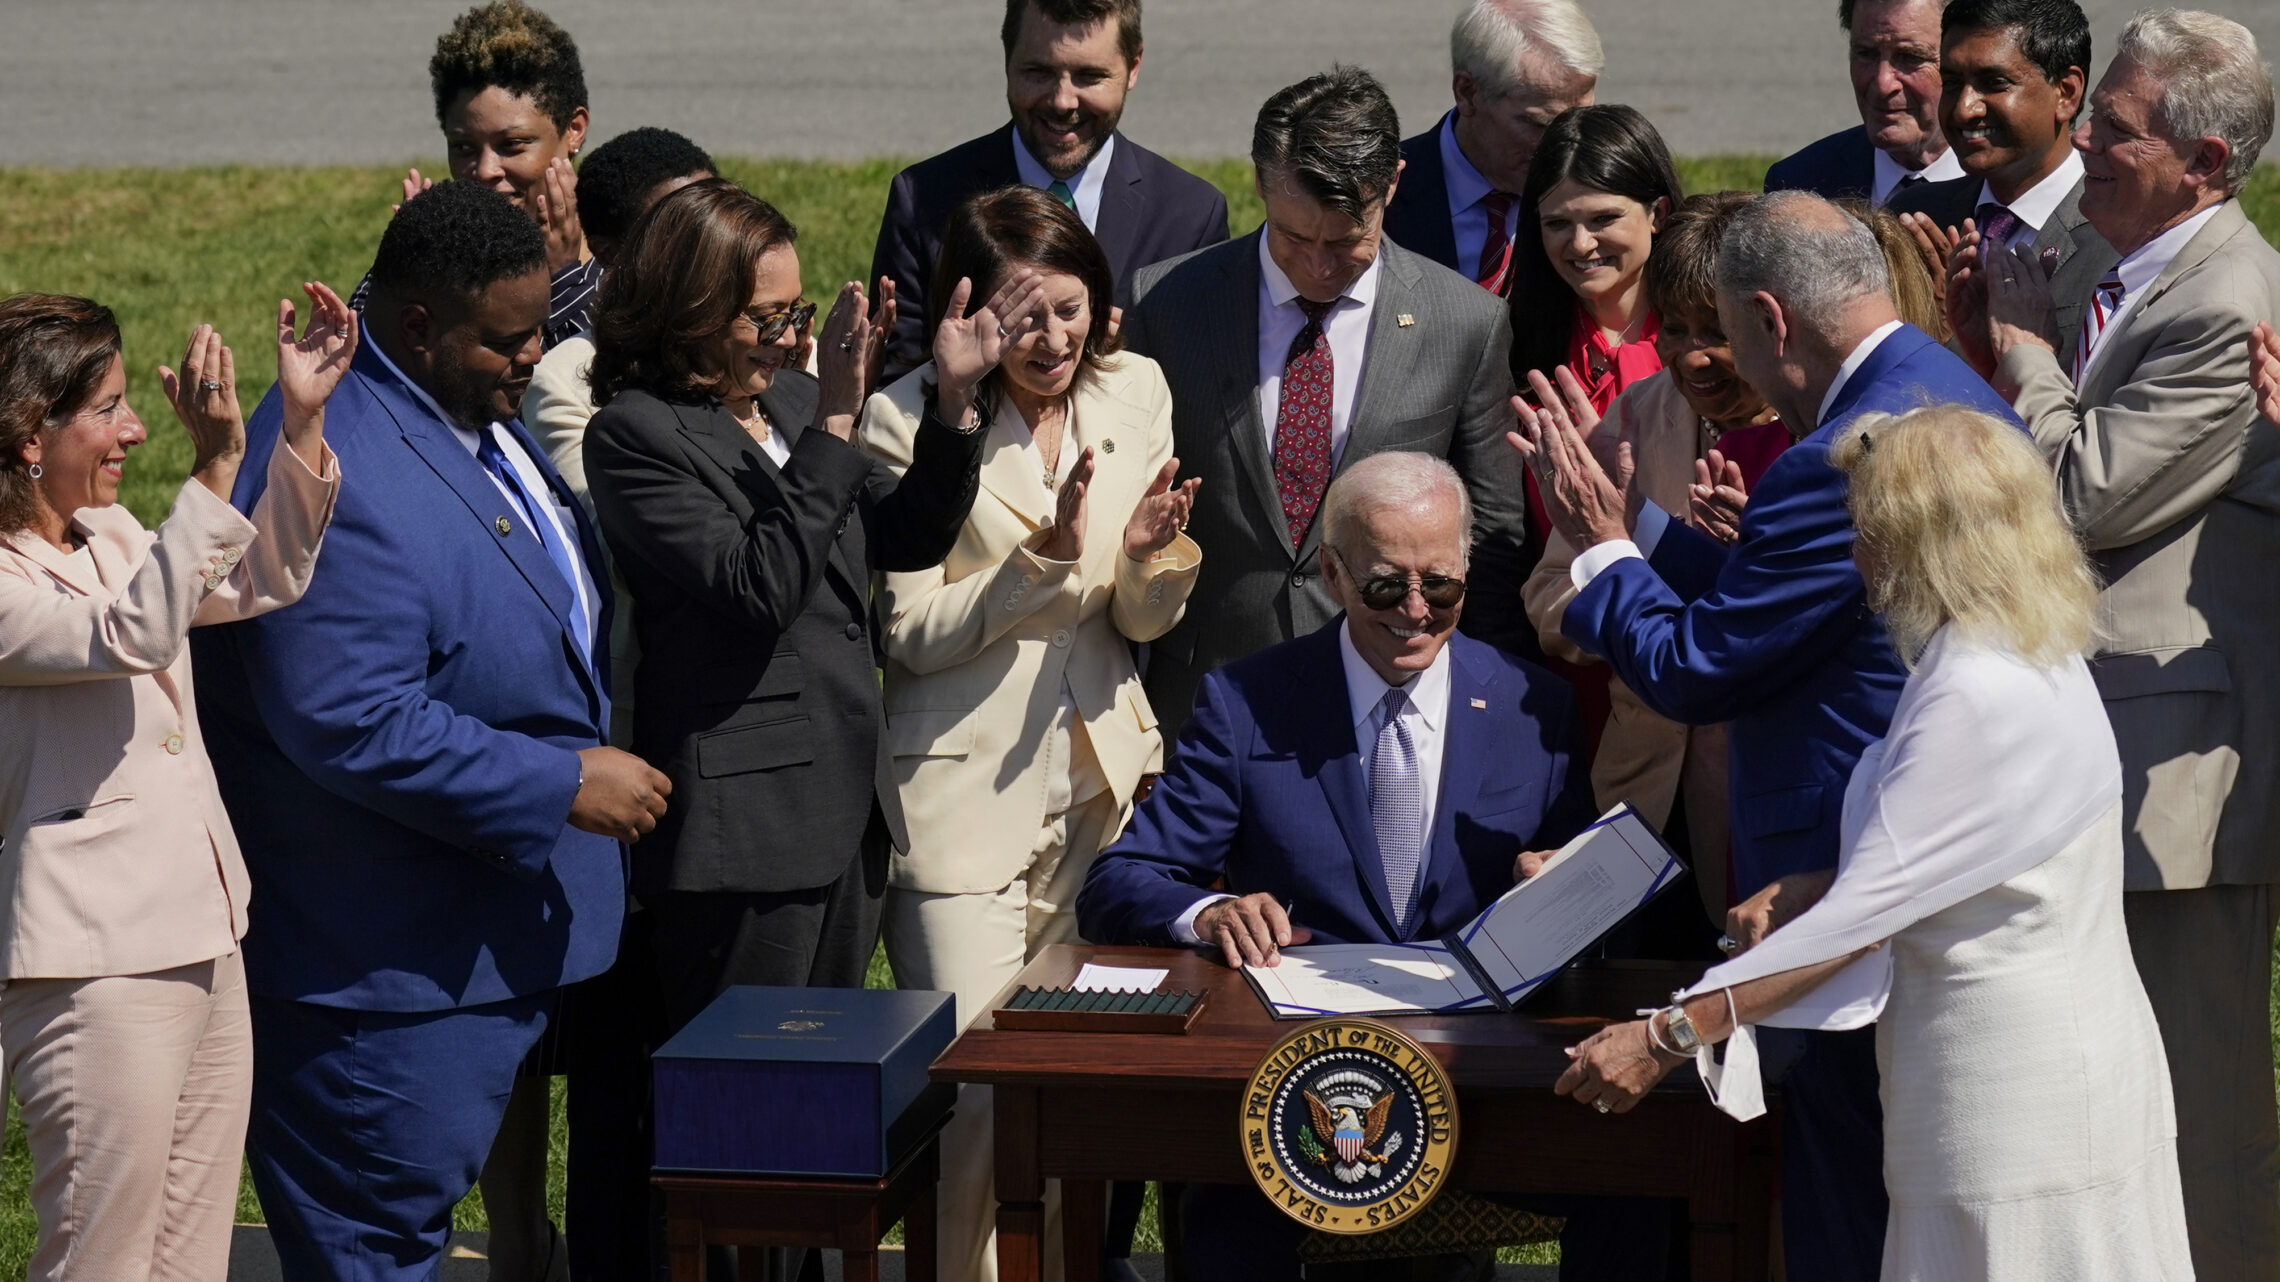 President Joe Biden is applauded after signing into law H.R. 4346, the CHIPS and Science Act of 2022, at the White House in Washington, Tuesday, Aug. 9, 2022.